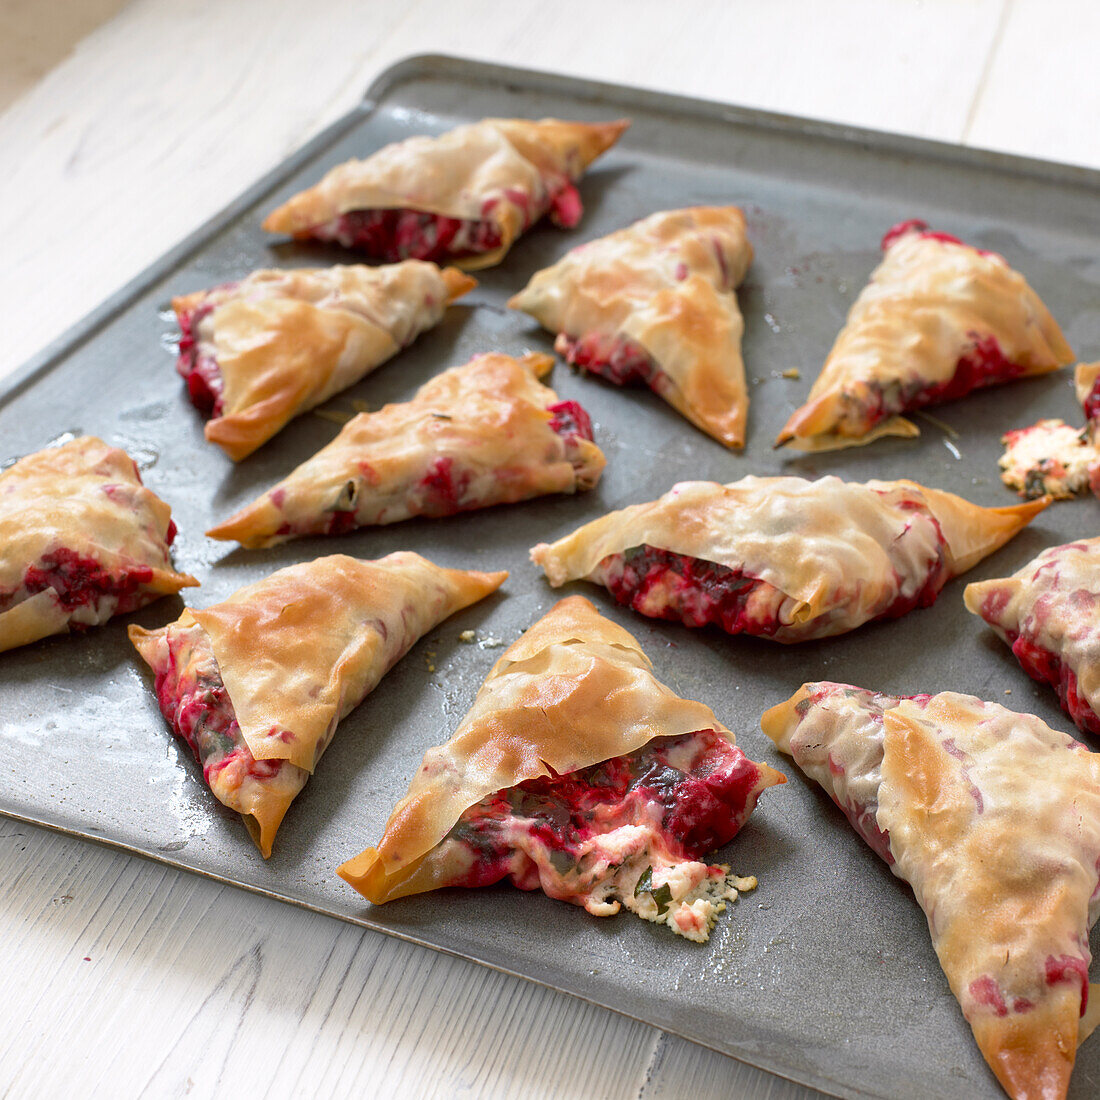 Beetroot and feta in filo pastry on baking tray